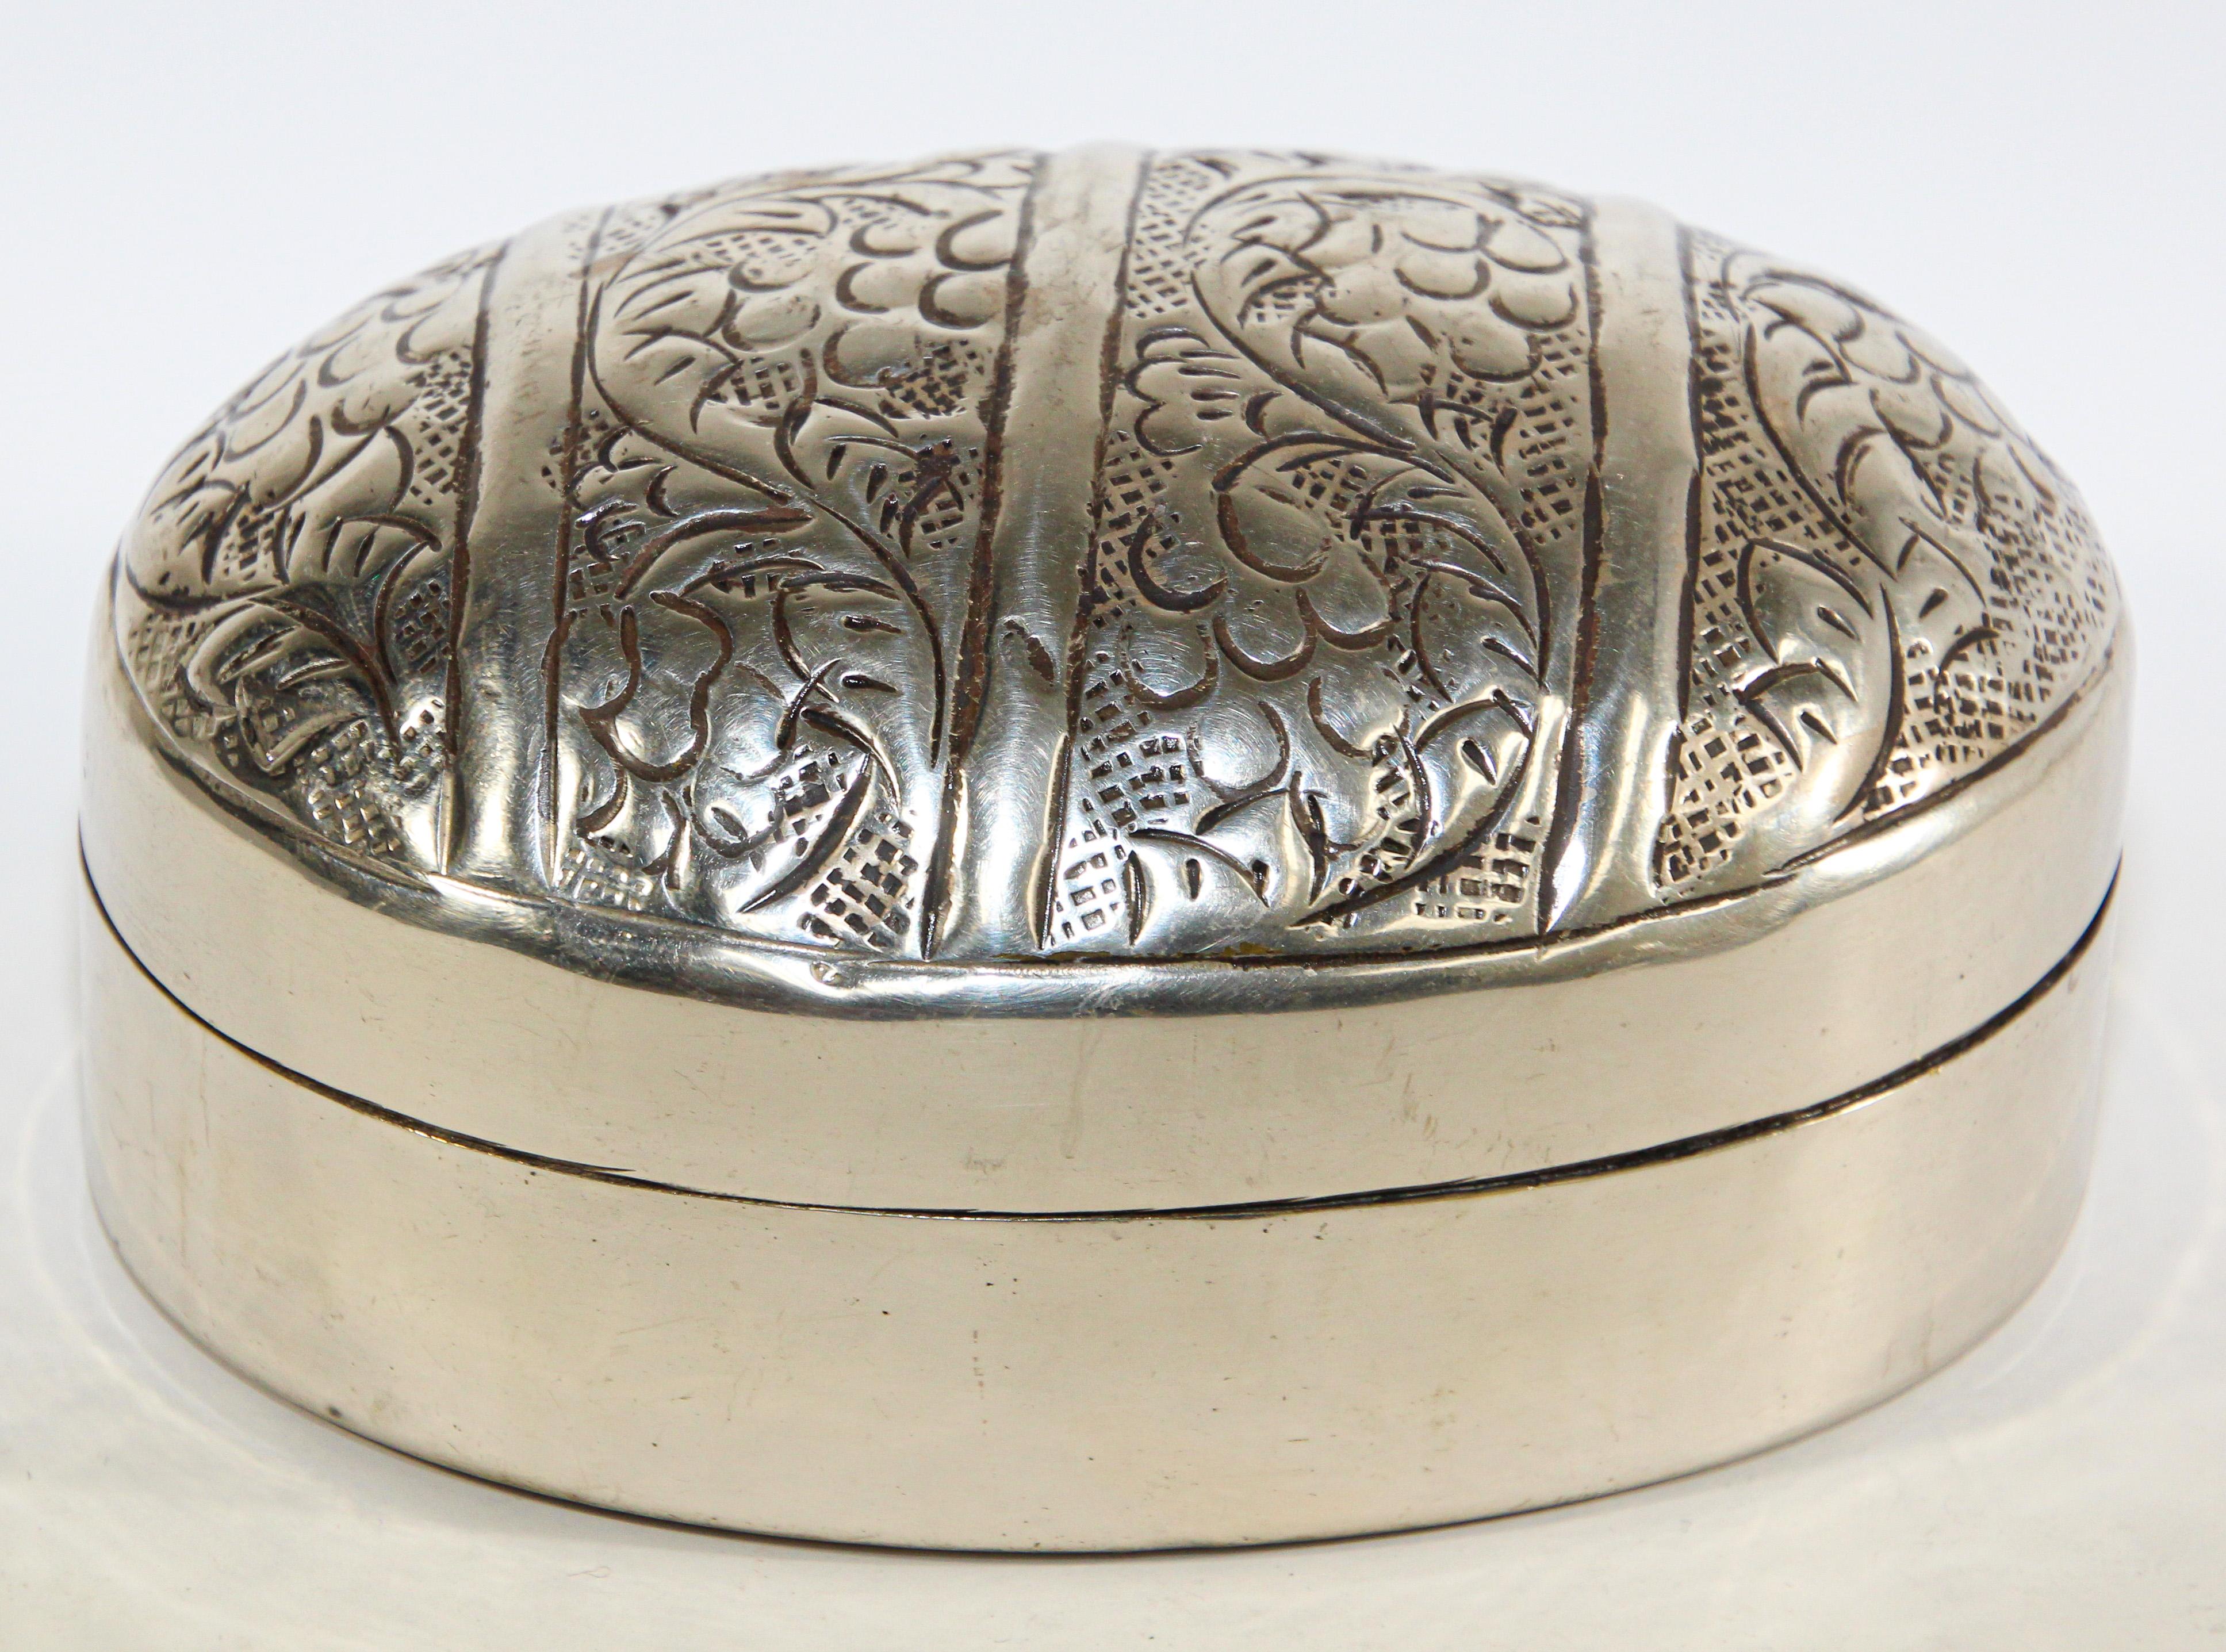 Asian decorative trinket lidded box in metal silvered hammered and etched with organic floral design.
Anglo Raj style oval form betel box.
Dimensions: 5